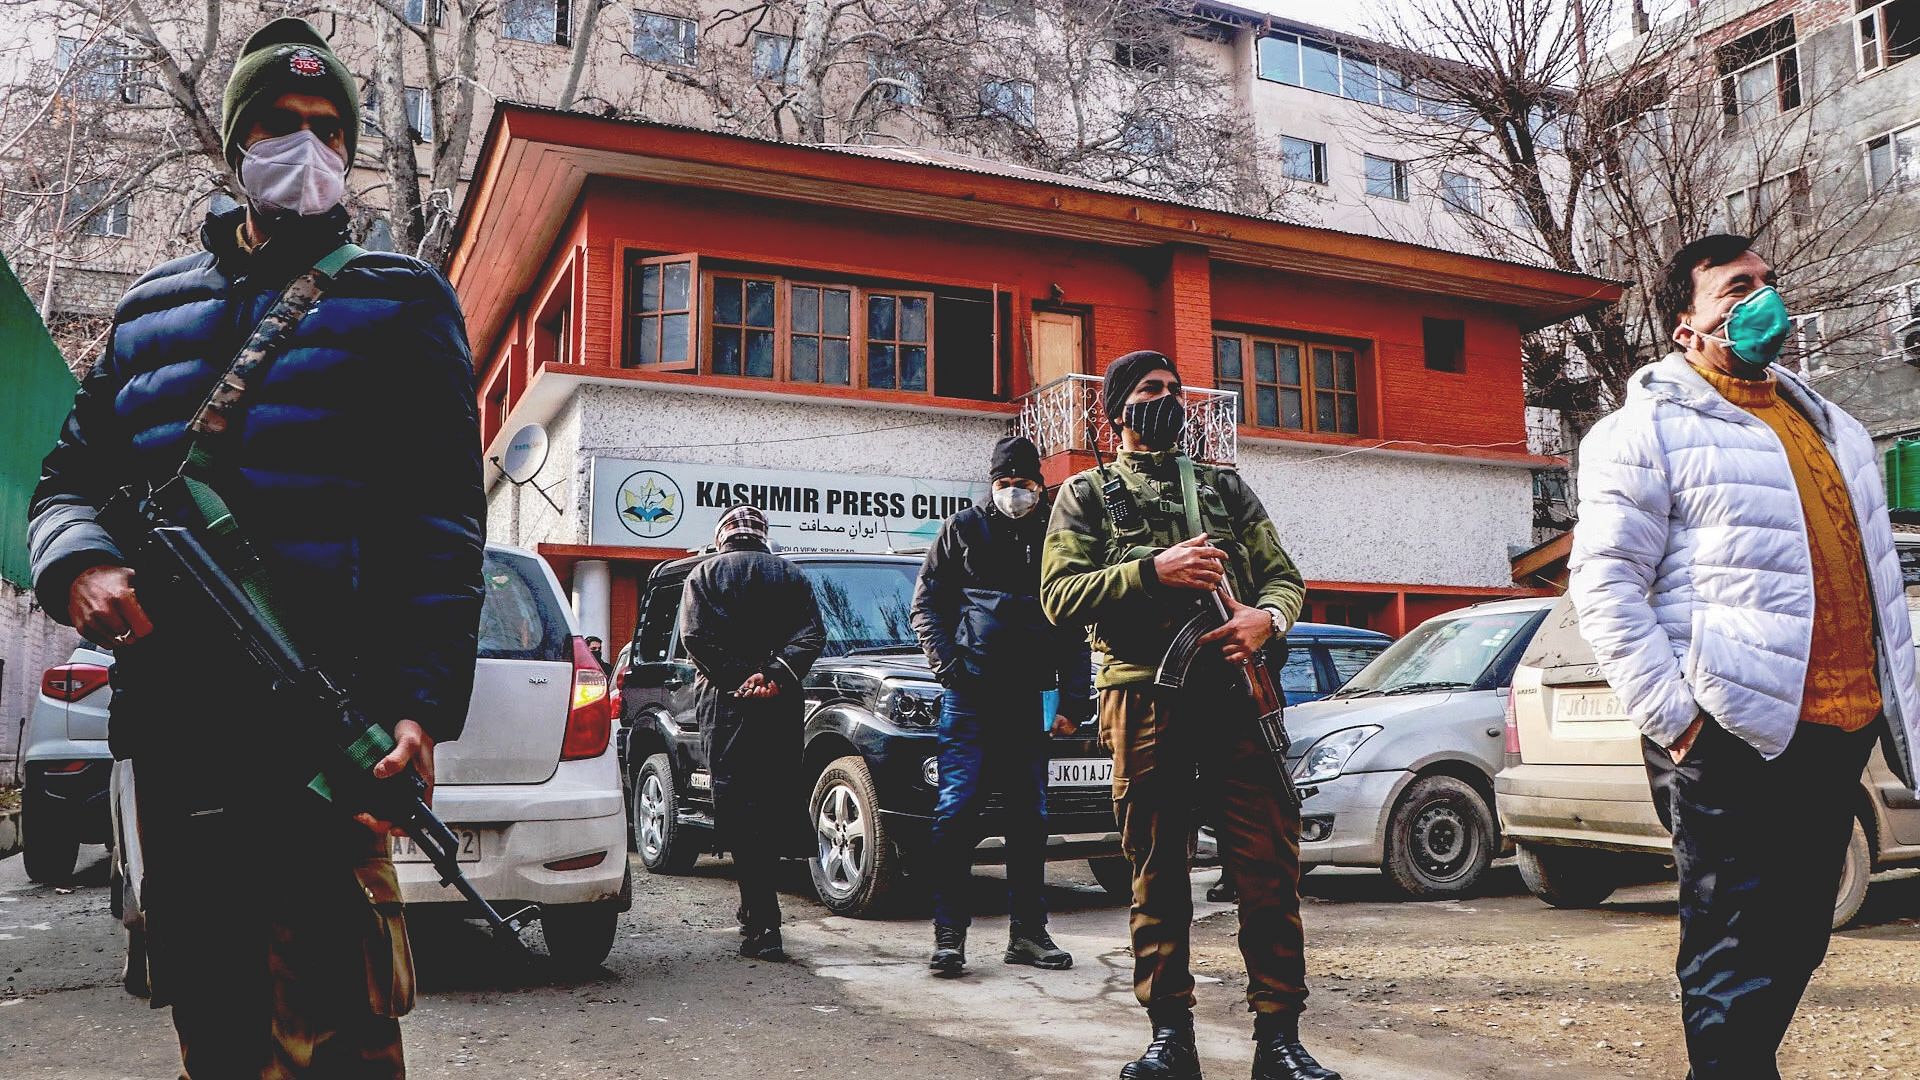 <div class="paragraphs"><p>Amid the presence of police personnel, the&nbsp;<a href="https://twitter.com/hashtag/Kashmirpressclub?src=hashtag_click">Kashmir Press Club</a> was taken over by a group of journalists led by Saleem Pandit, Zulfkar Majid and Arshid Rasool.</p></div>